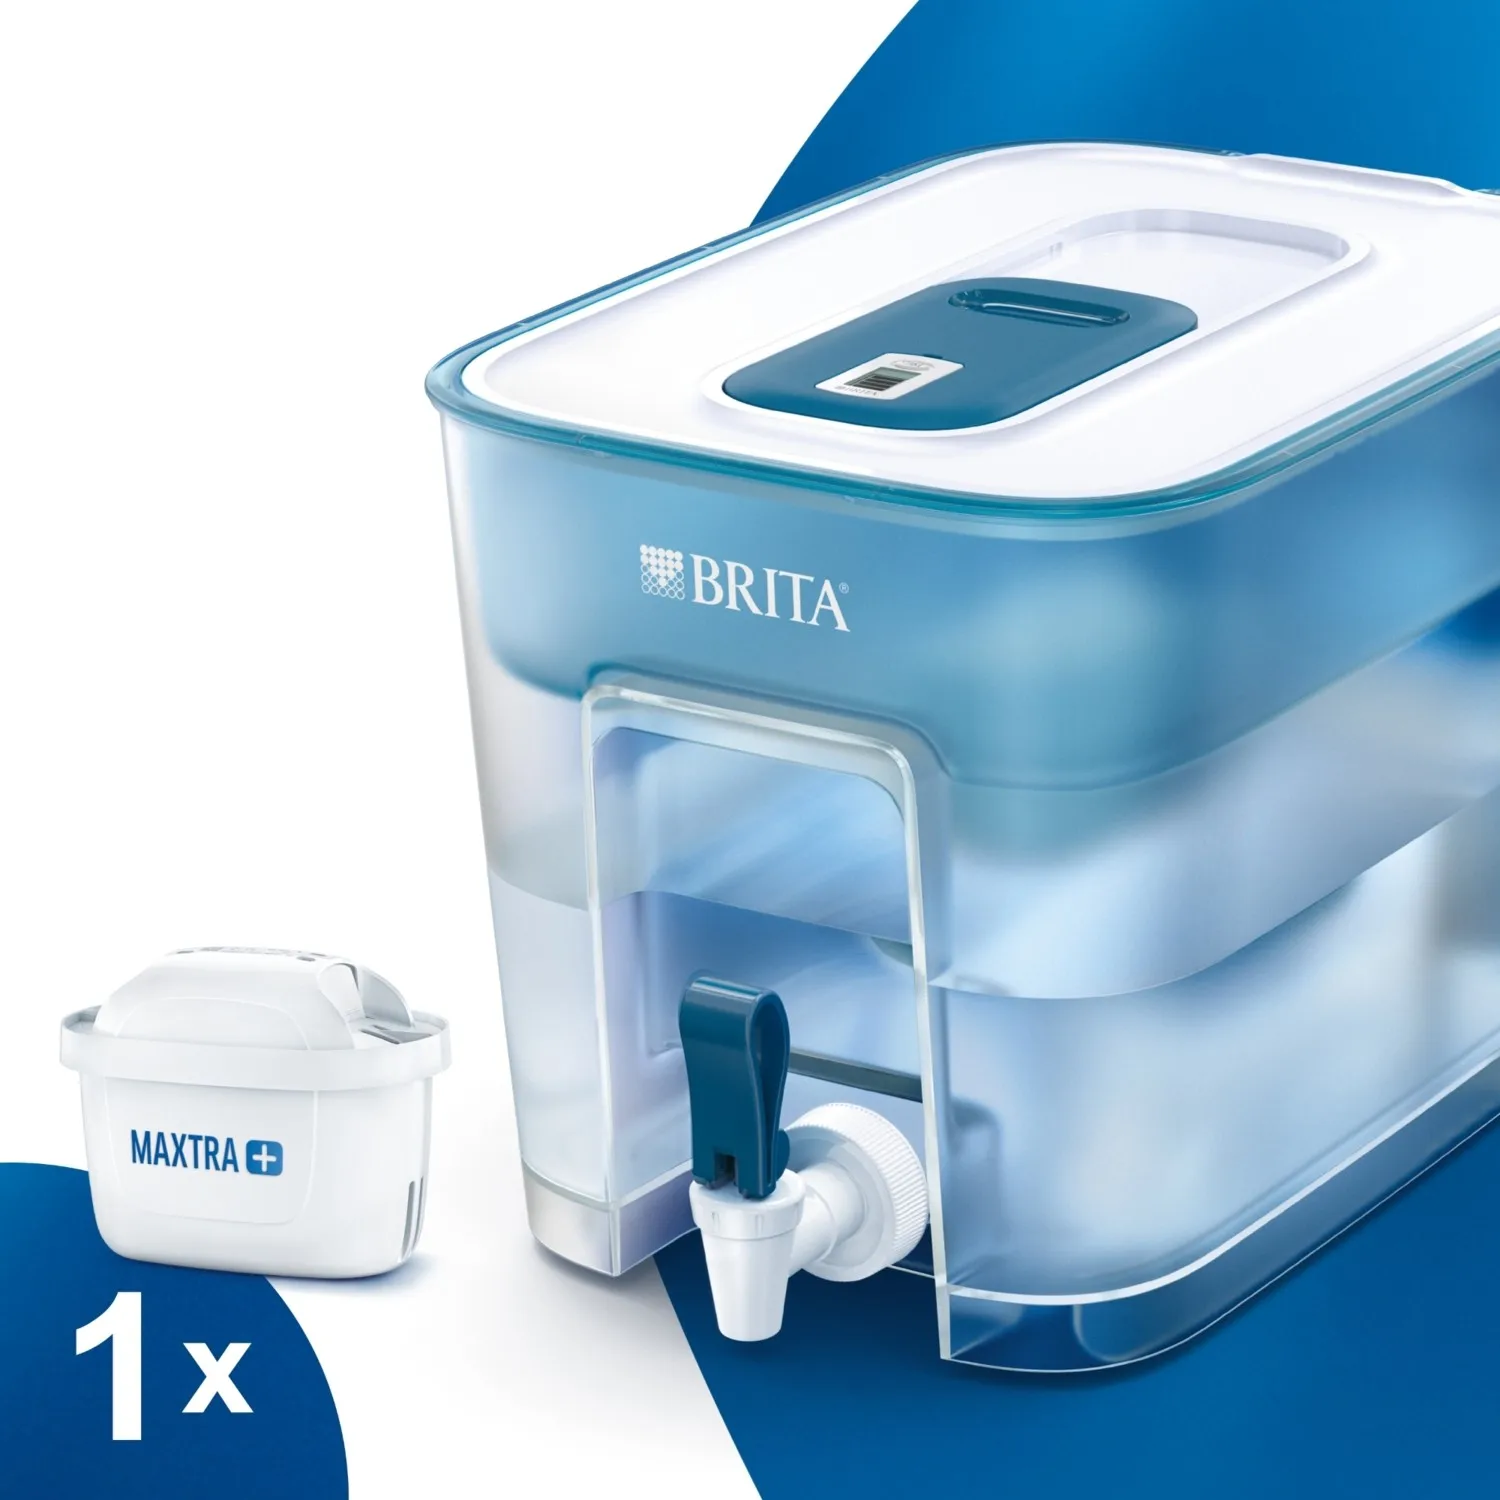 BRITA Flow 8.2L Water Filter Tank For Reduction Of Chlorine, Limescale And İmpurities